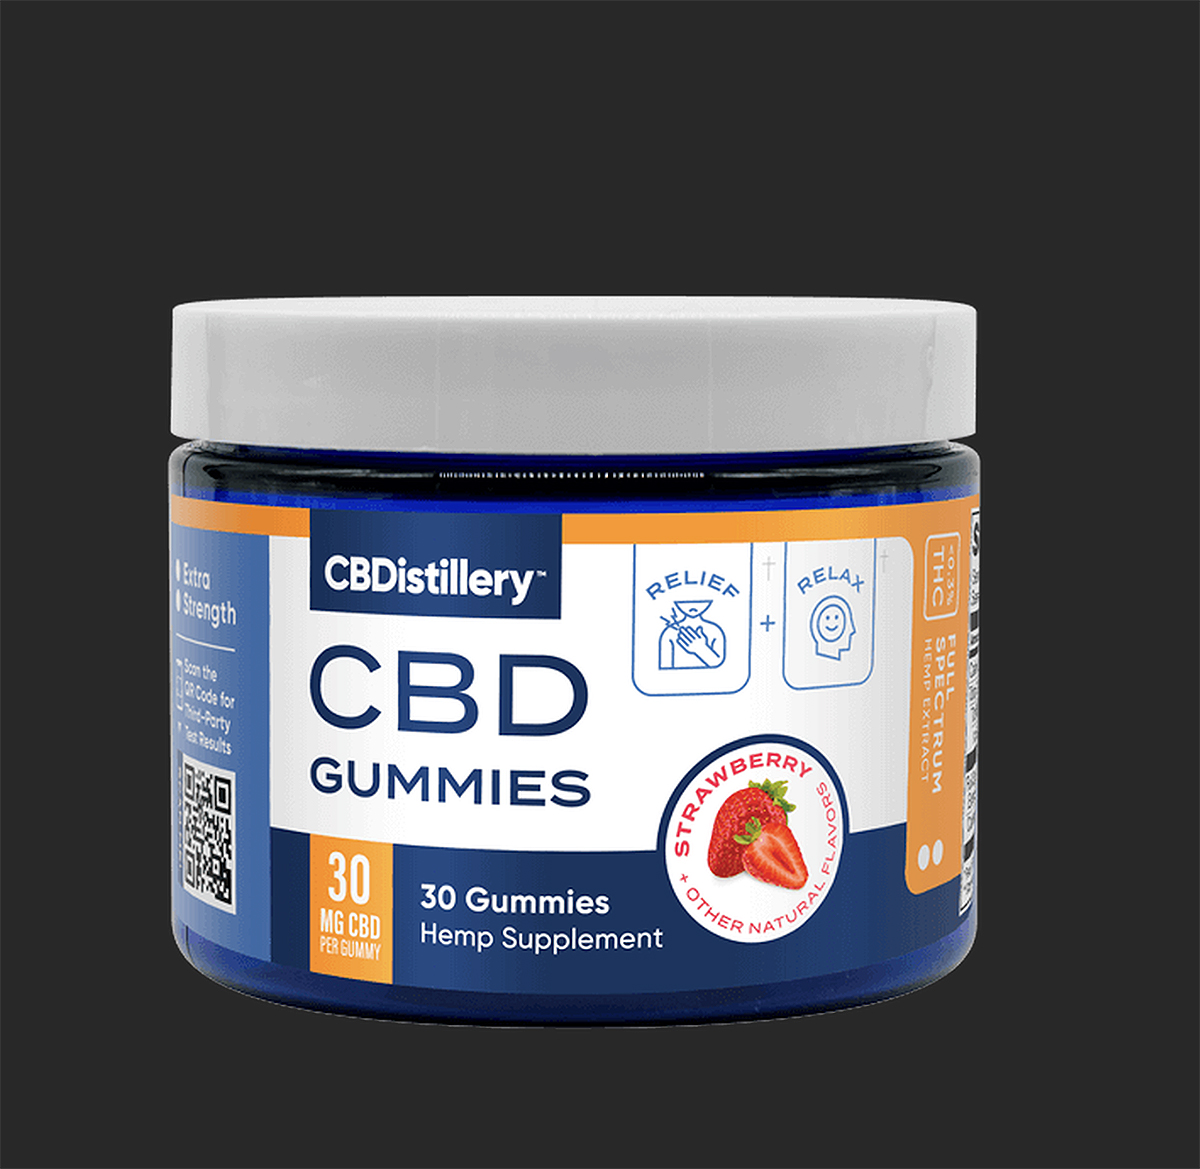 does CBD gummies give you munchies